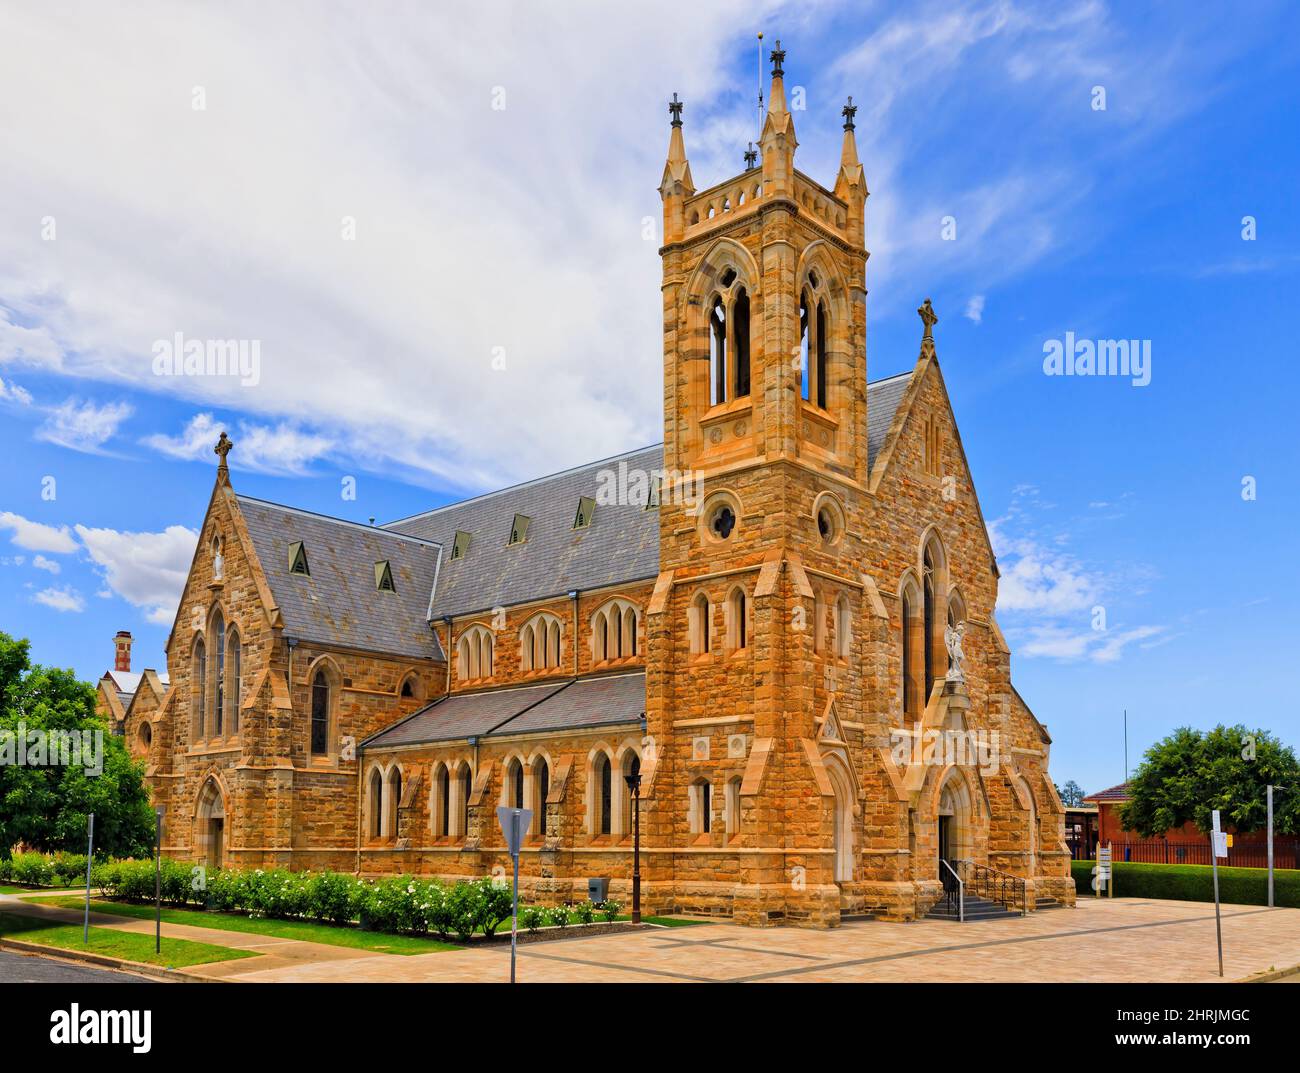 Entrance to historic heritage christian catholic cathedral in Wagga Wagga city of regional rural Australia. Stock Photo